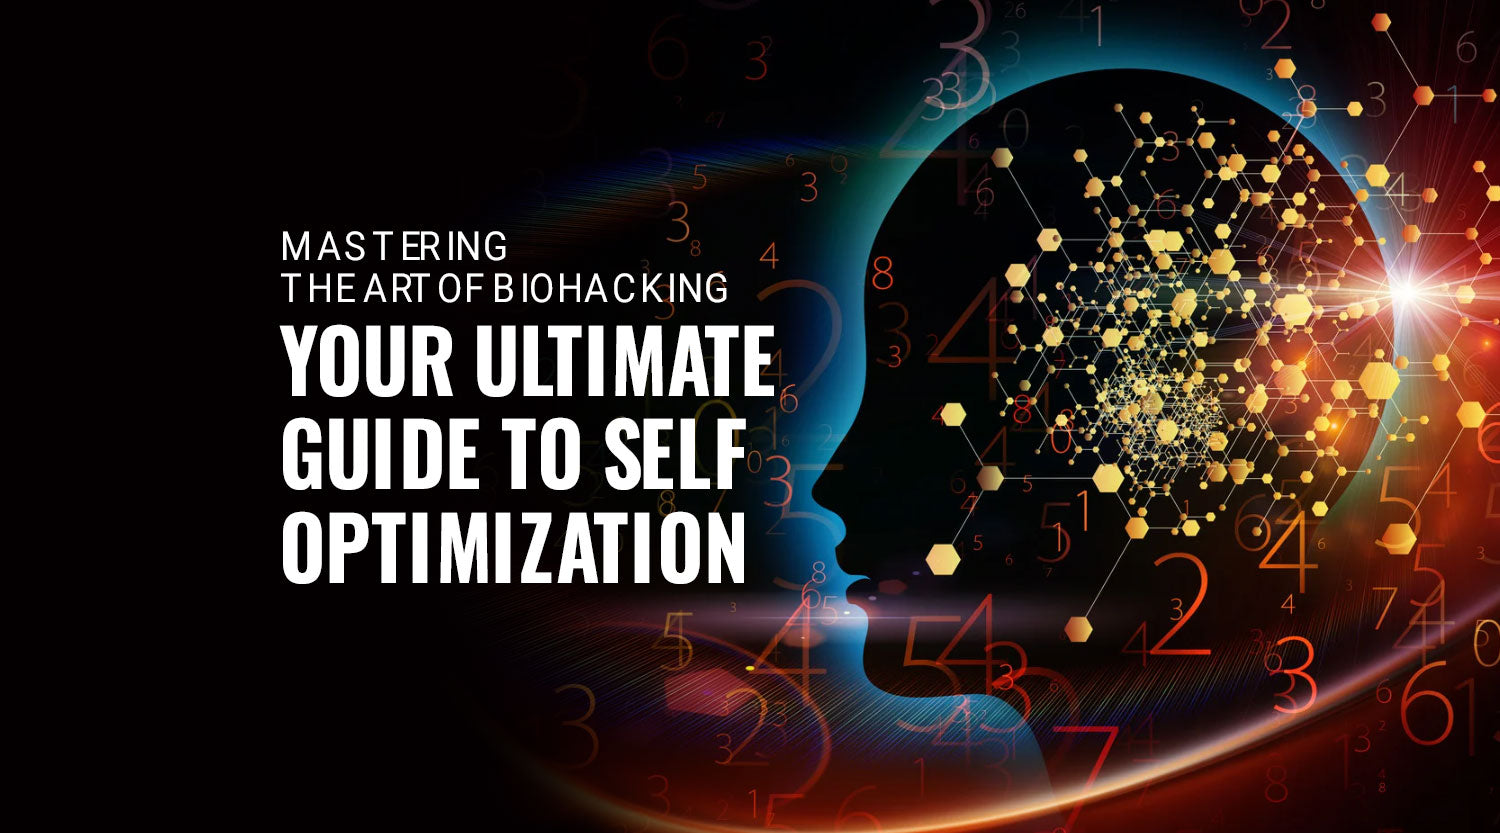 Mastering the Art of Biohacking: Your Ultimate Guide to Self-Optimization